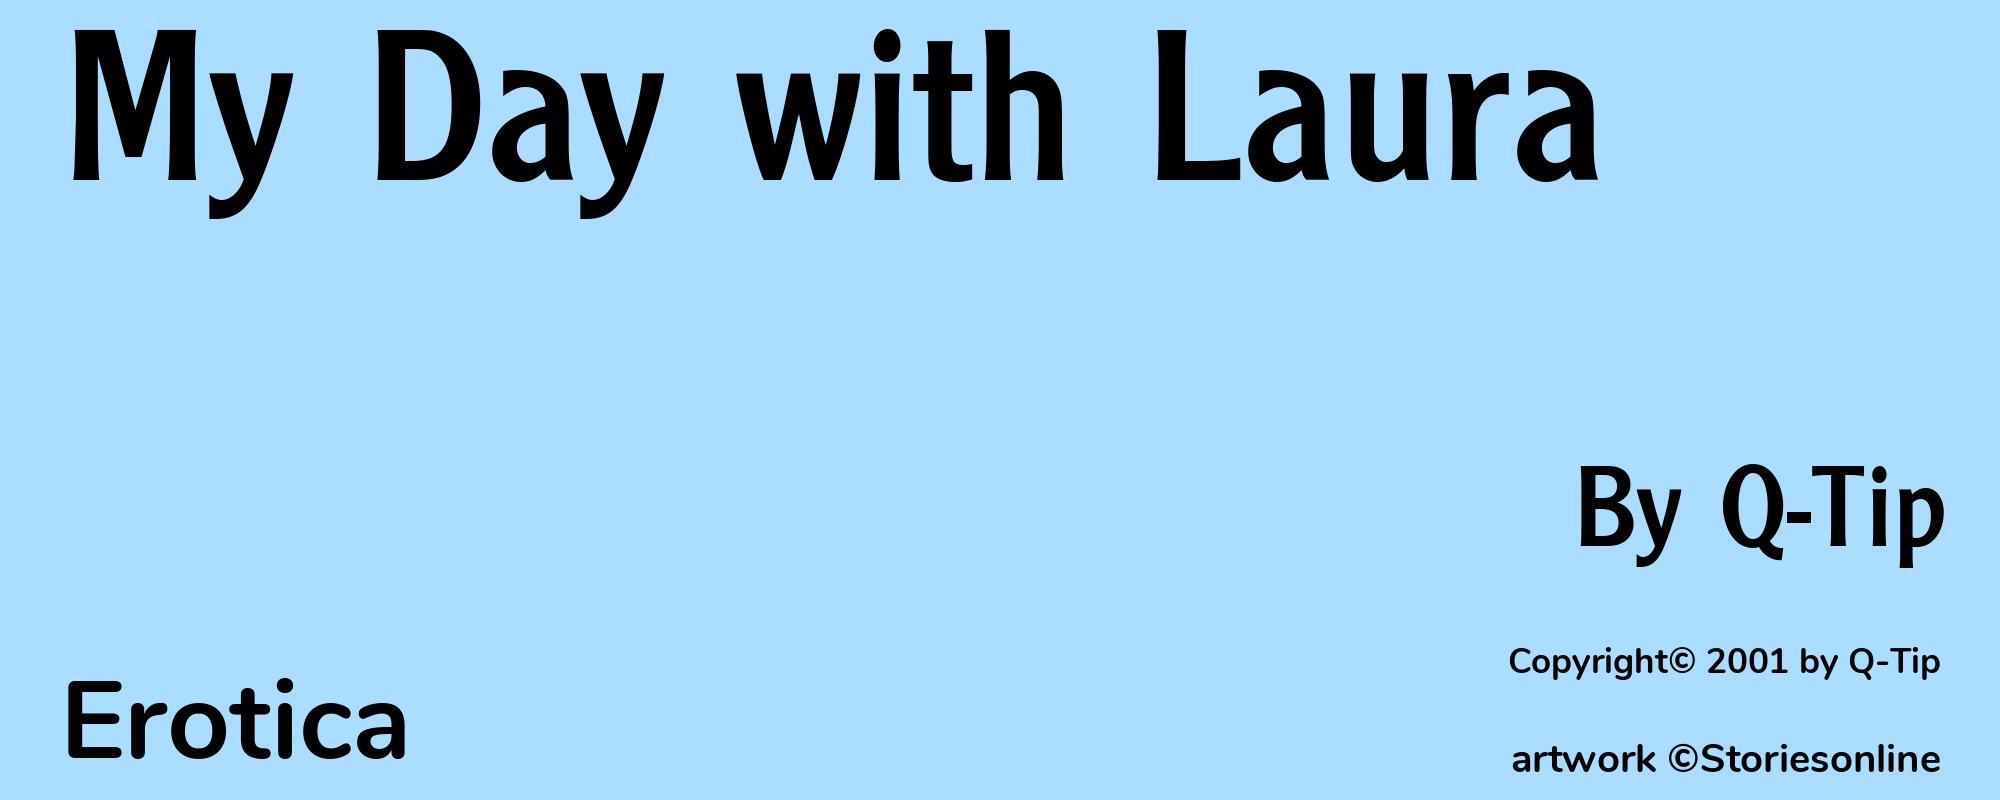 My Day with Laura - Cover